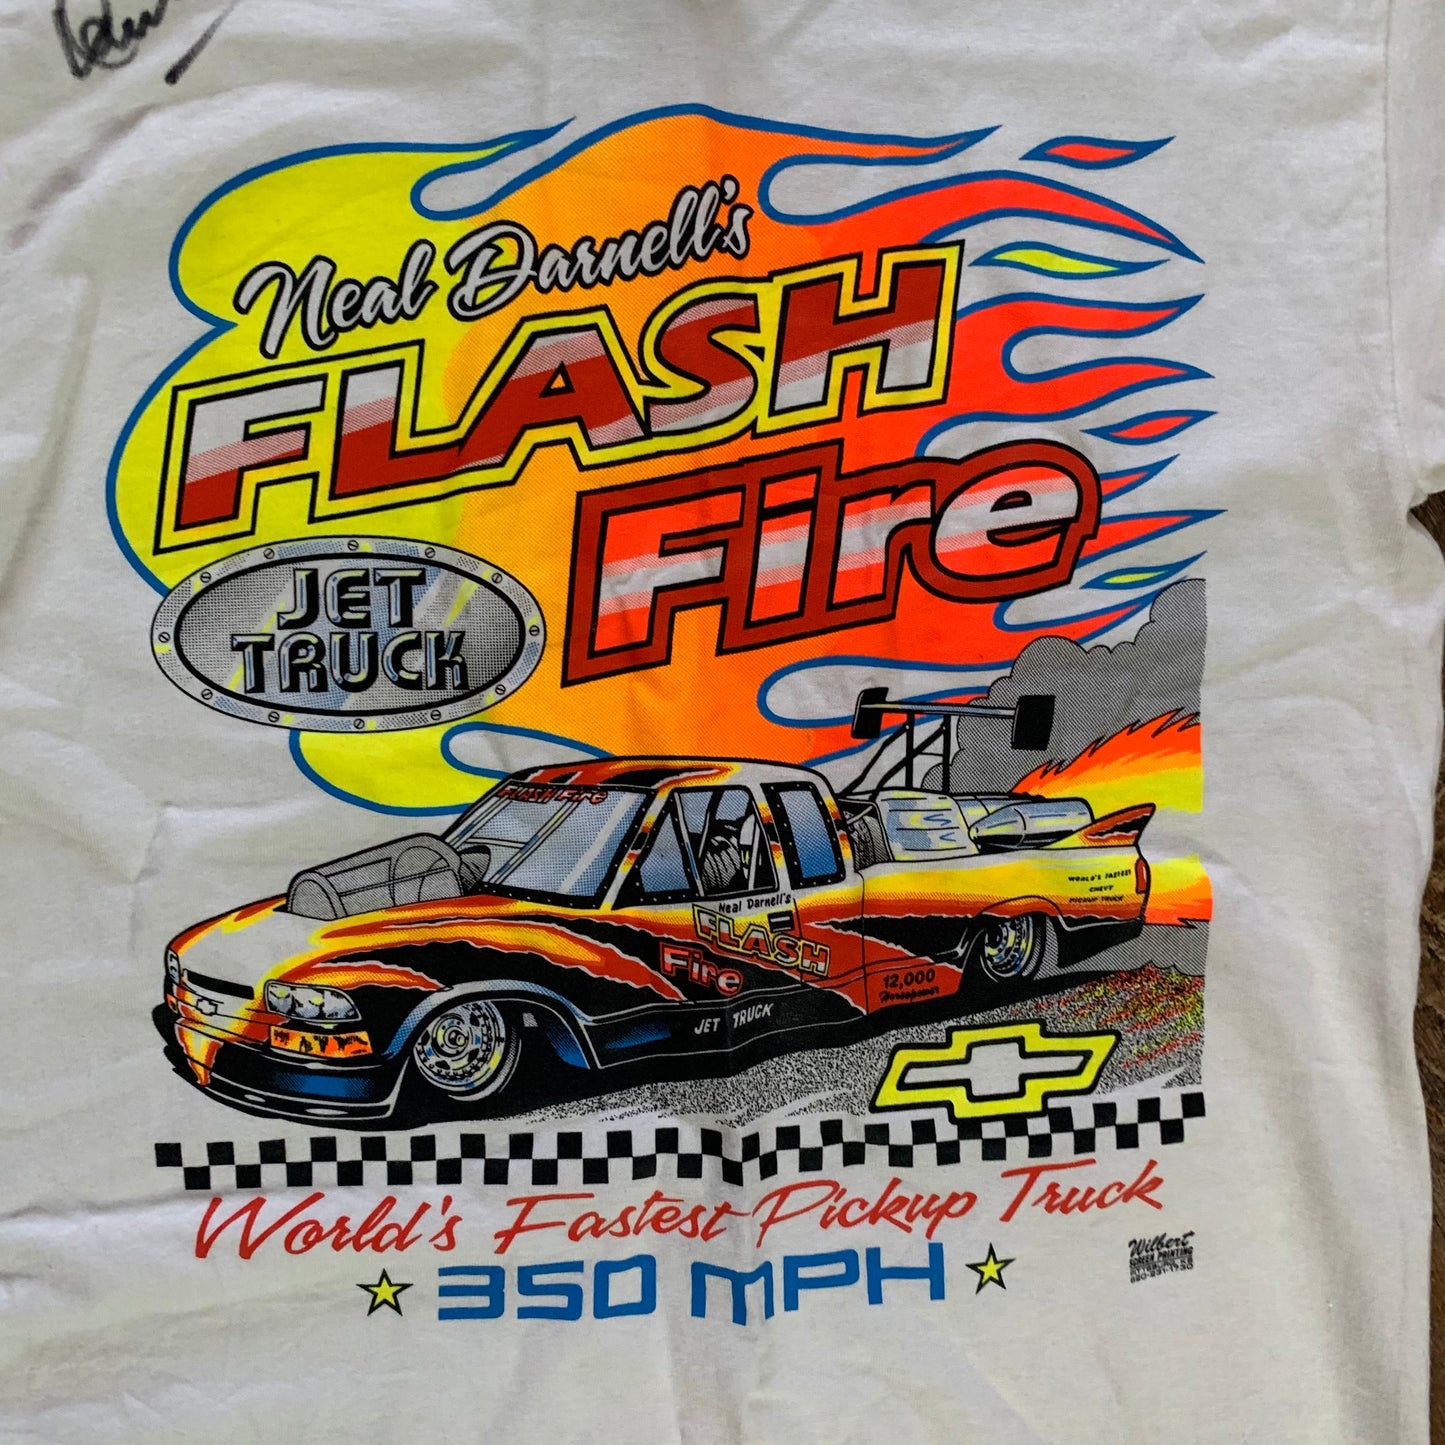 Neal Darnell's autographed race Truck Vintage tee